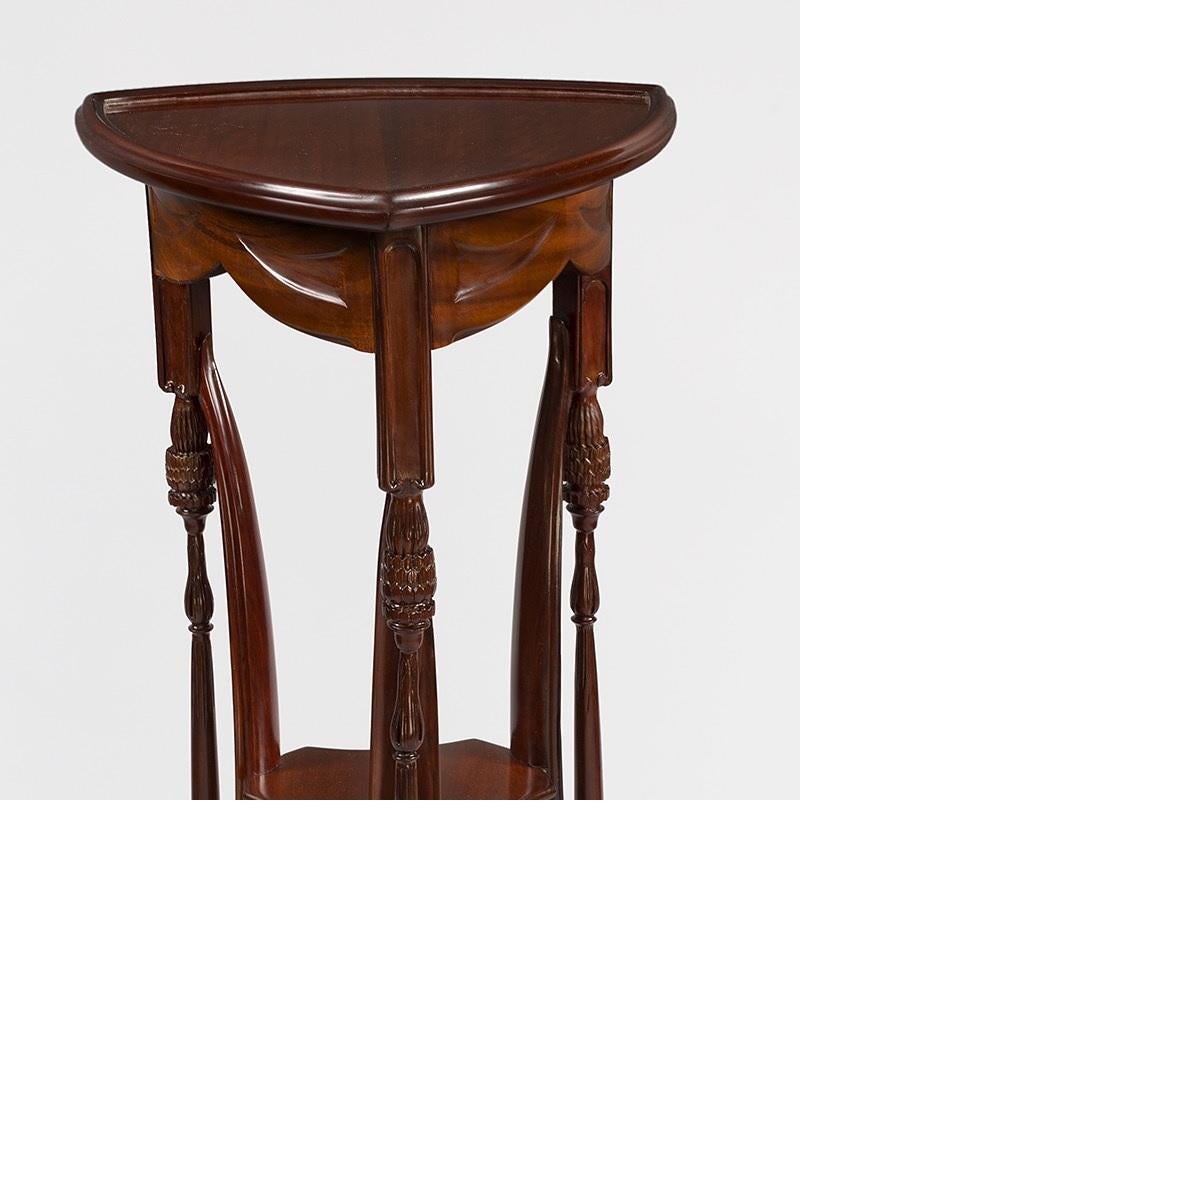 A French Art Nouveau carved mahogany three-tiered pedestal by Louis Majorelle. This piece features a triangular top with a molded gallery that sits on raised foliate carved legs with three conjoining buttresses and two shelves, circa 1900. 

This